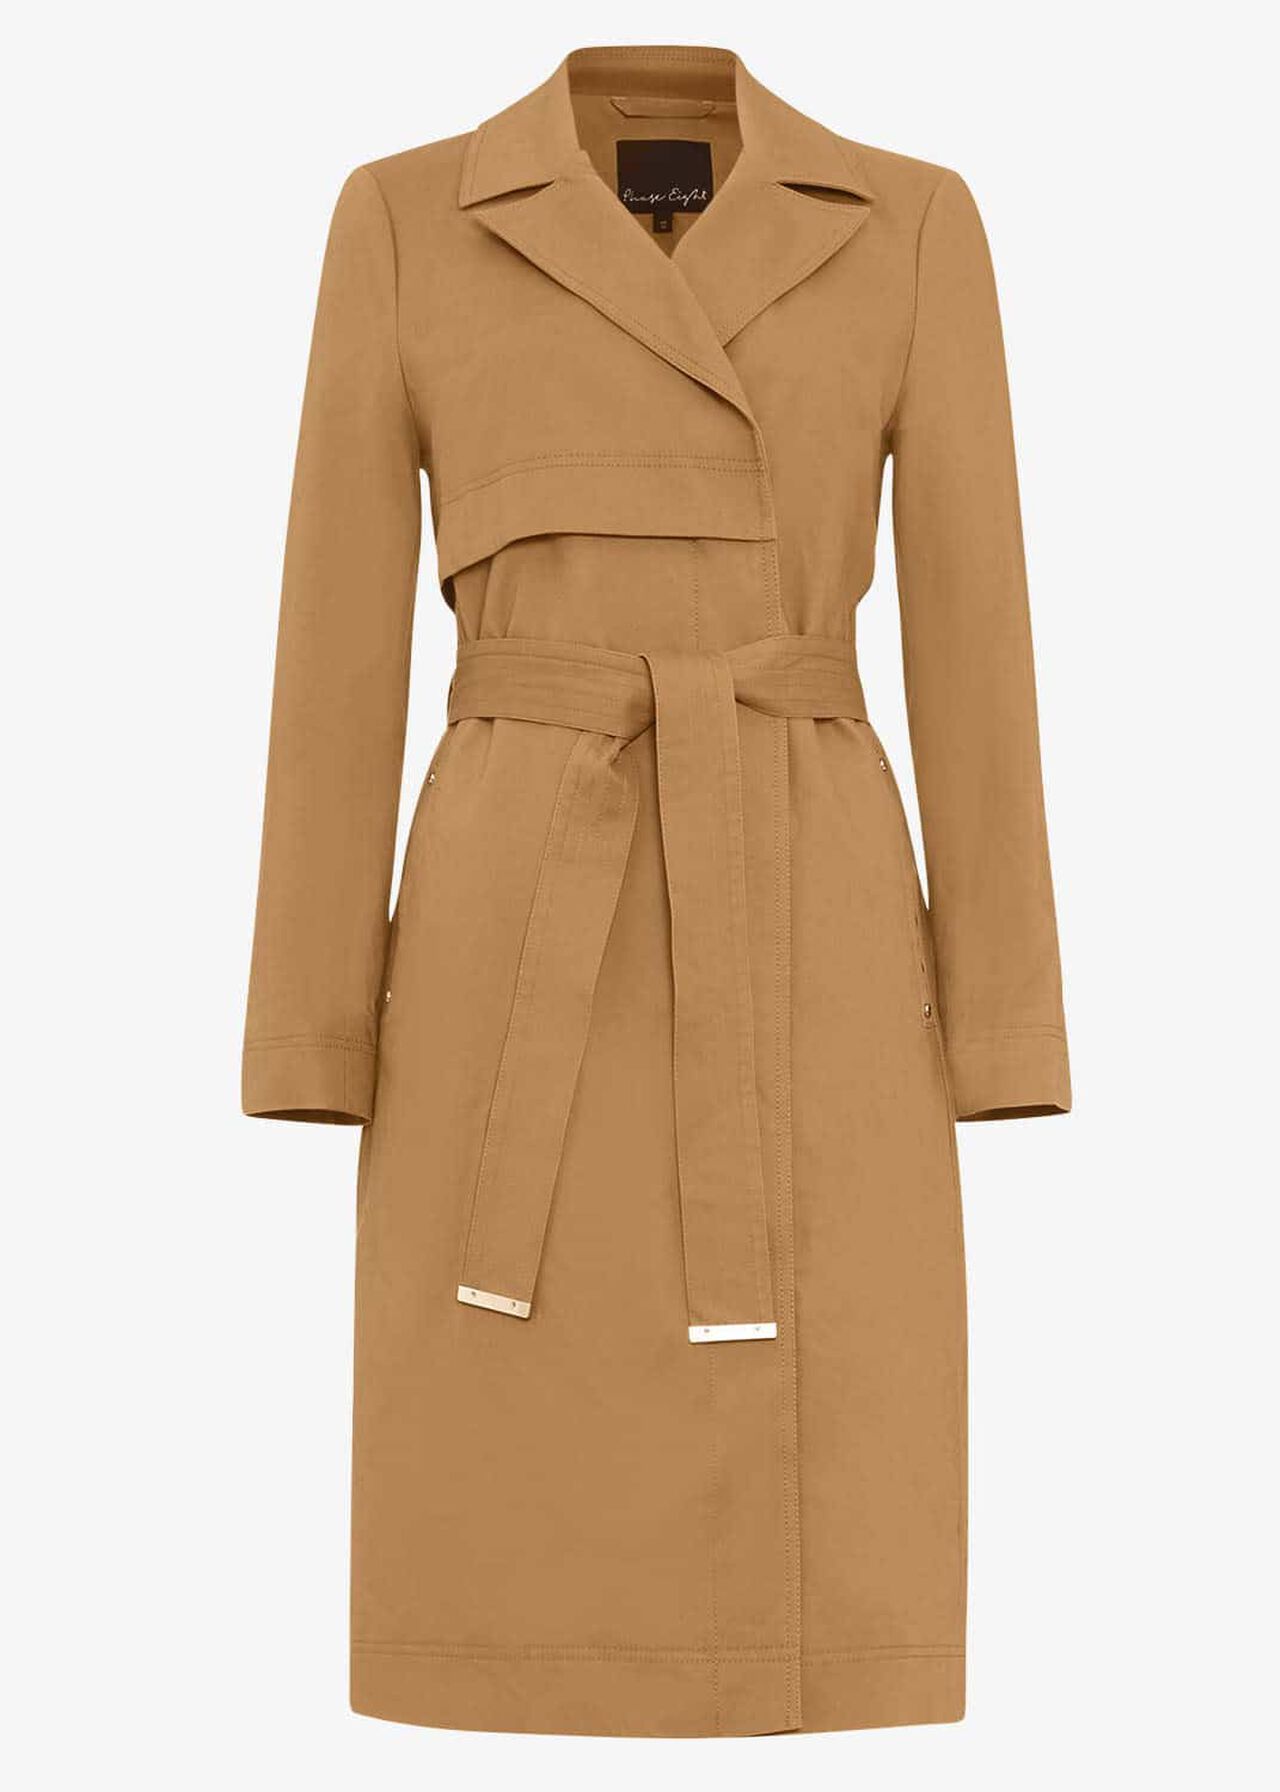 Tayte Belted Trench Coat